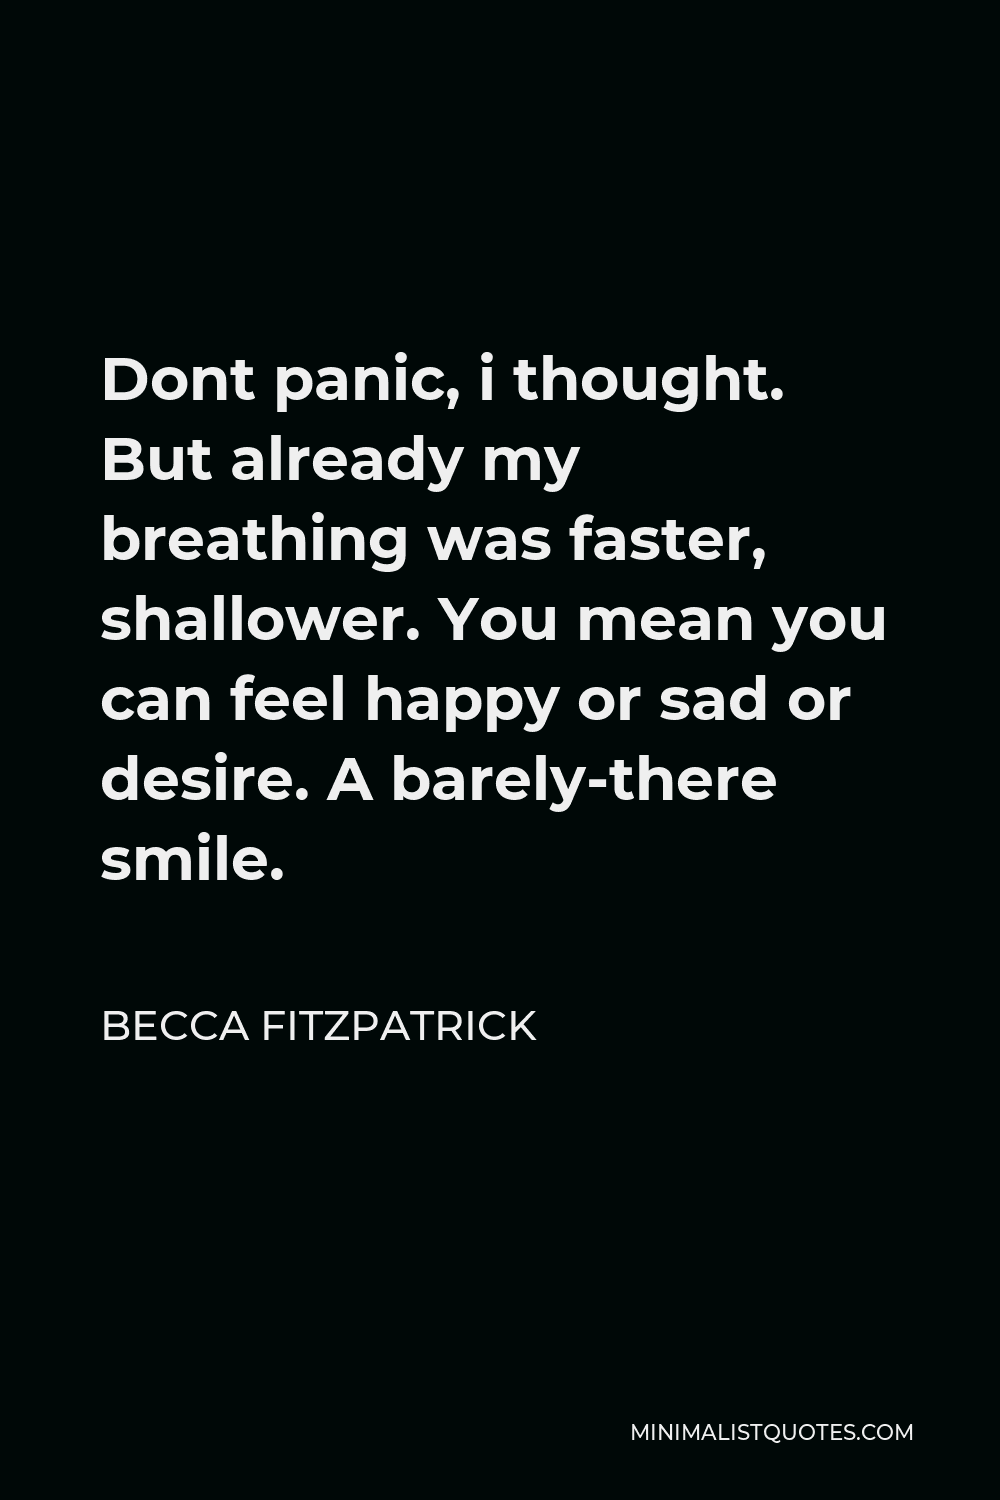 Becca Fitzpatrick Quote - Dont panic, i thought. But already my breathing was faster, shallower. You mean you can feel happy or sad or desire. A barely-there smile.